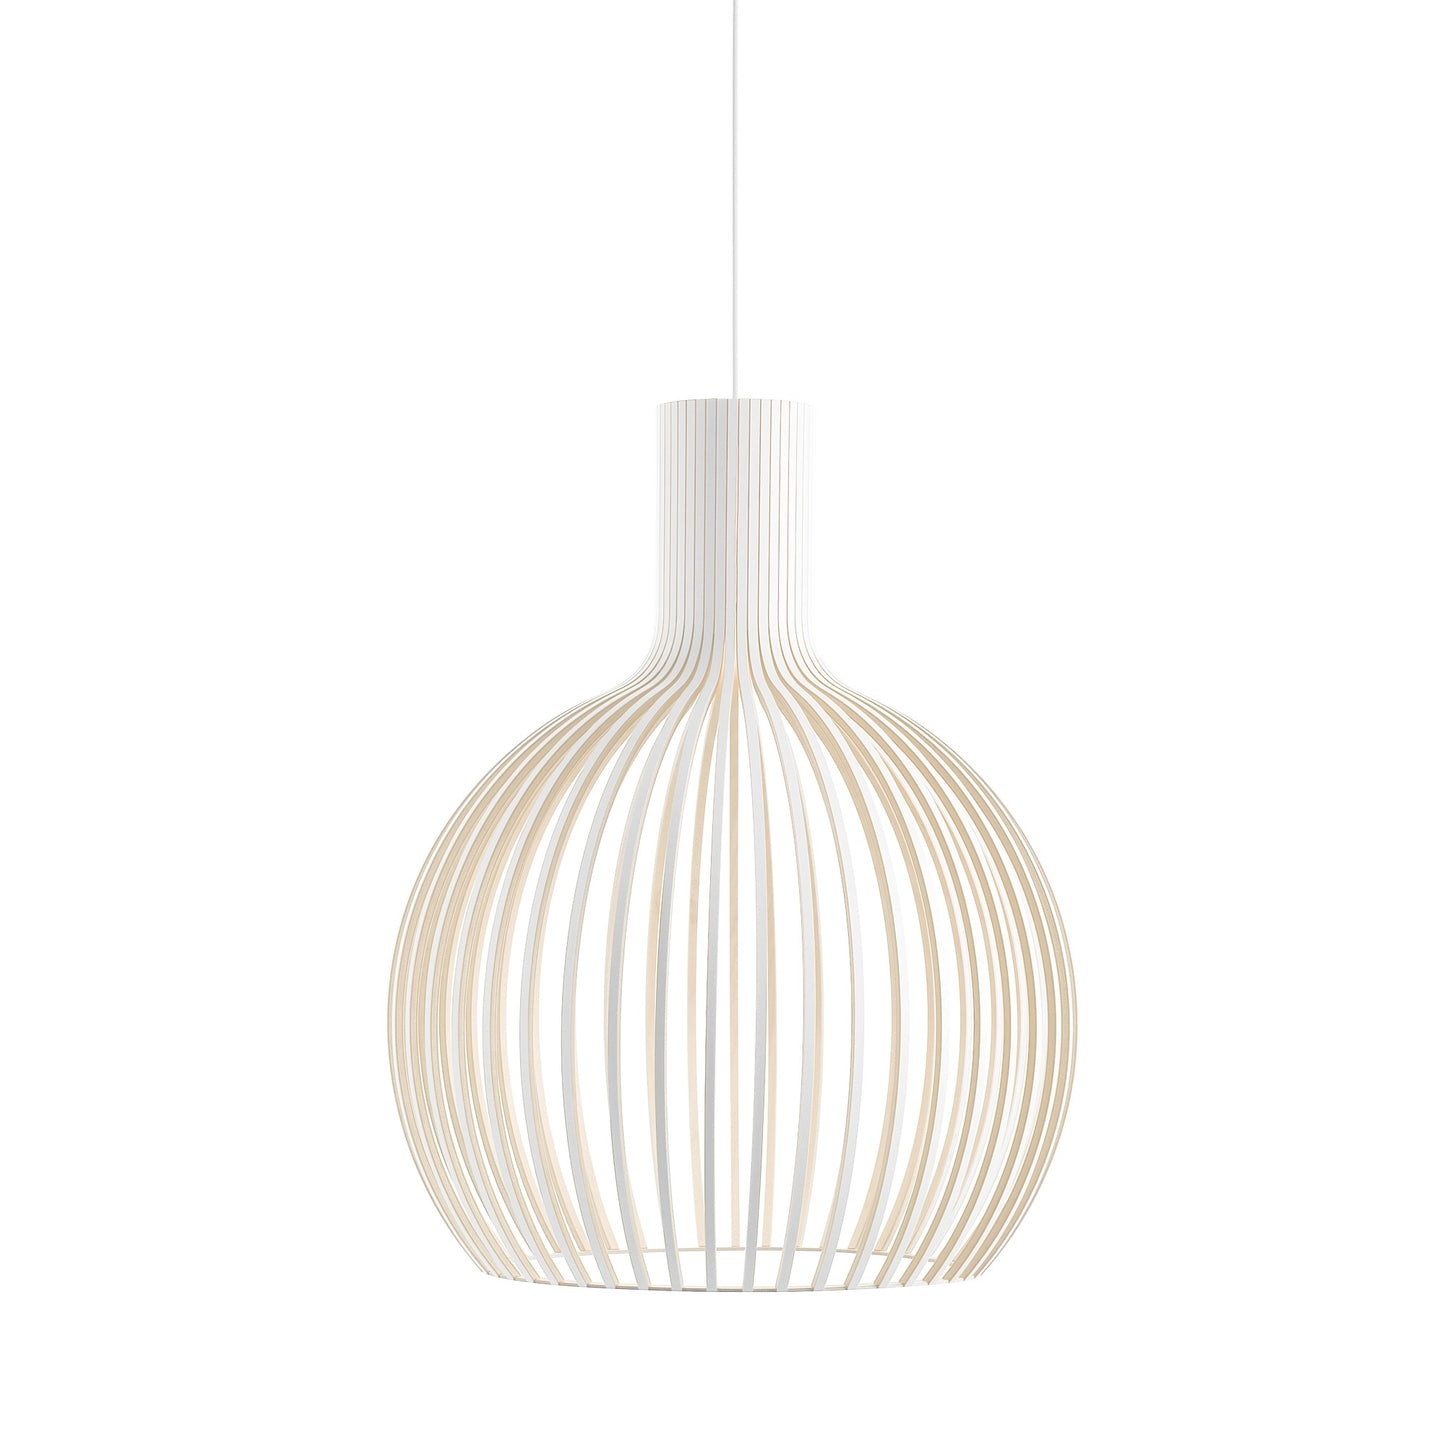 Octo 4240 Pendant Lamp by Secto #White